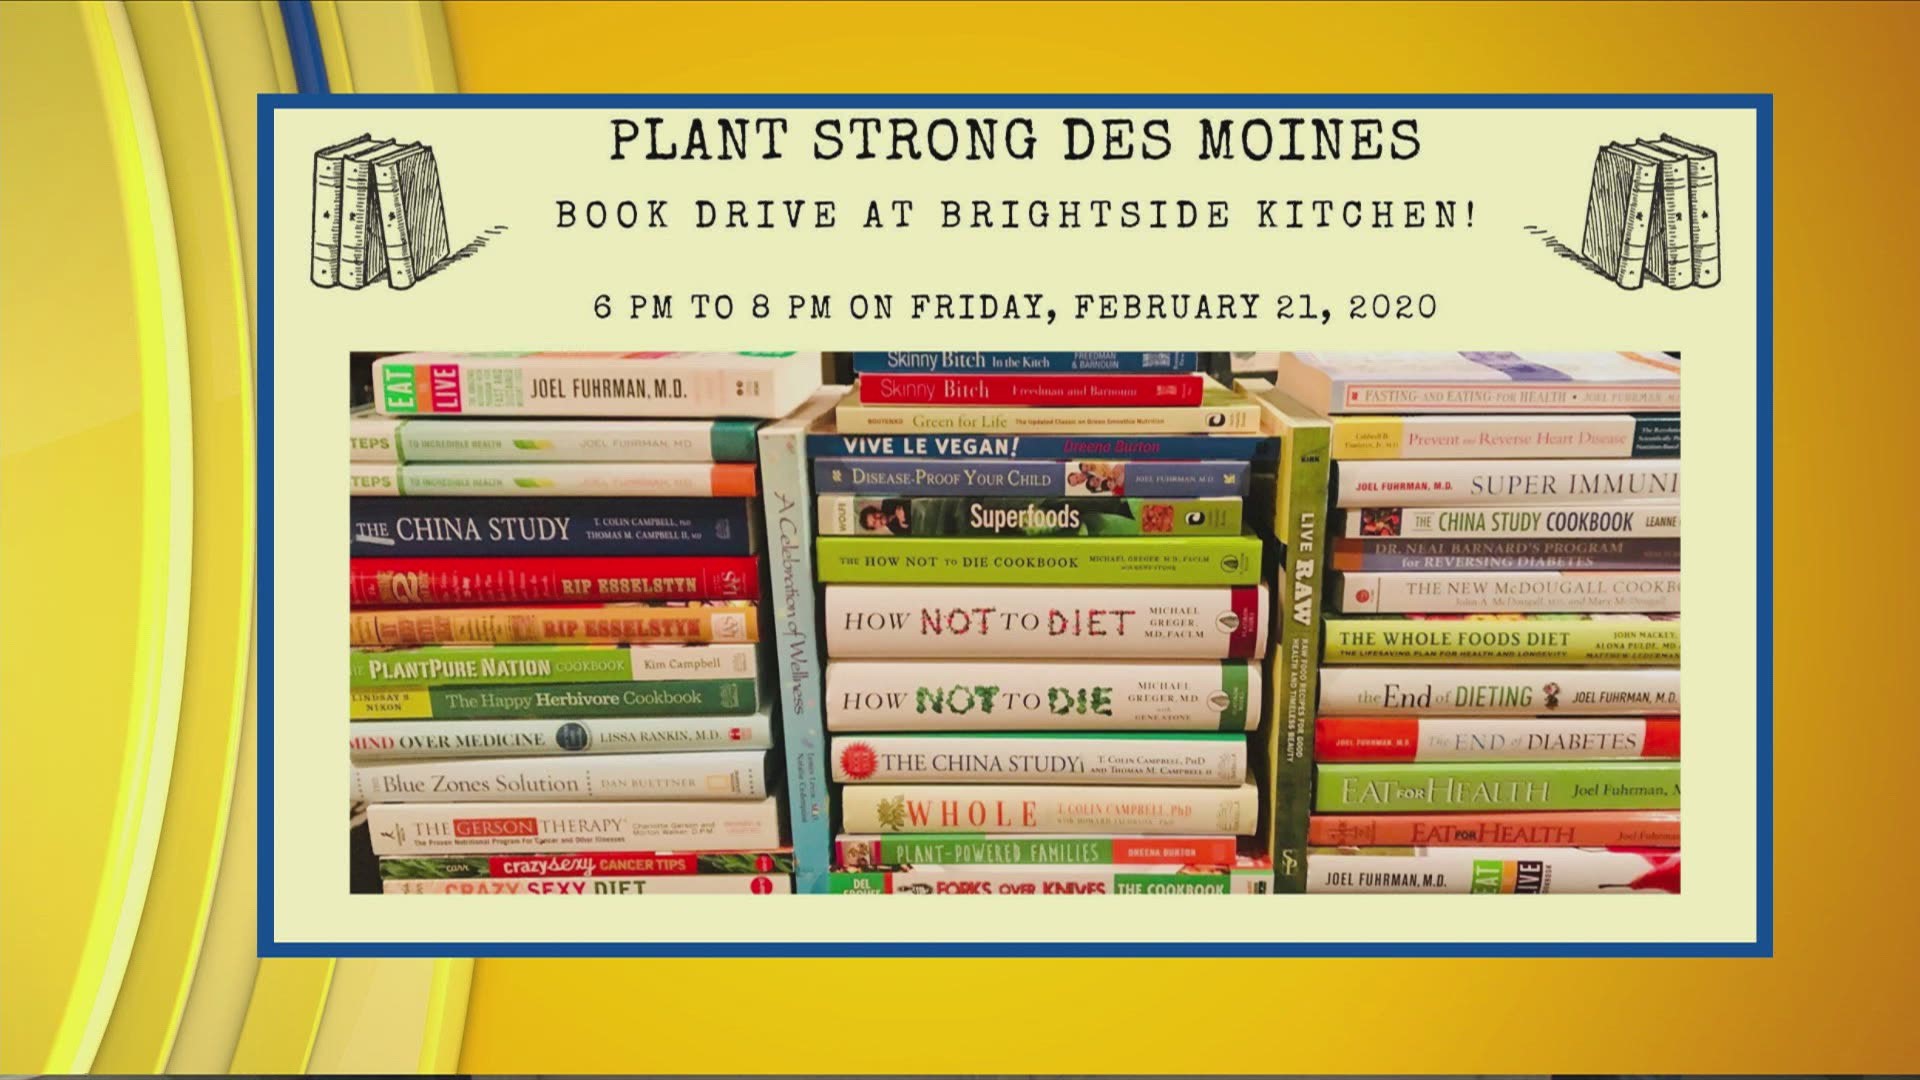 The Plant Strong Lending Library is a great local community resource and has been very popular with Brightside Kitchen's customers